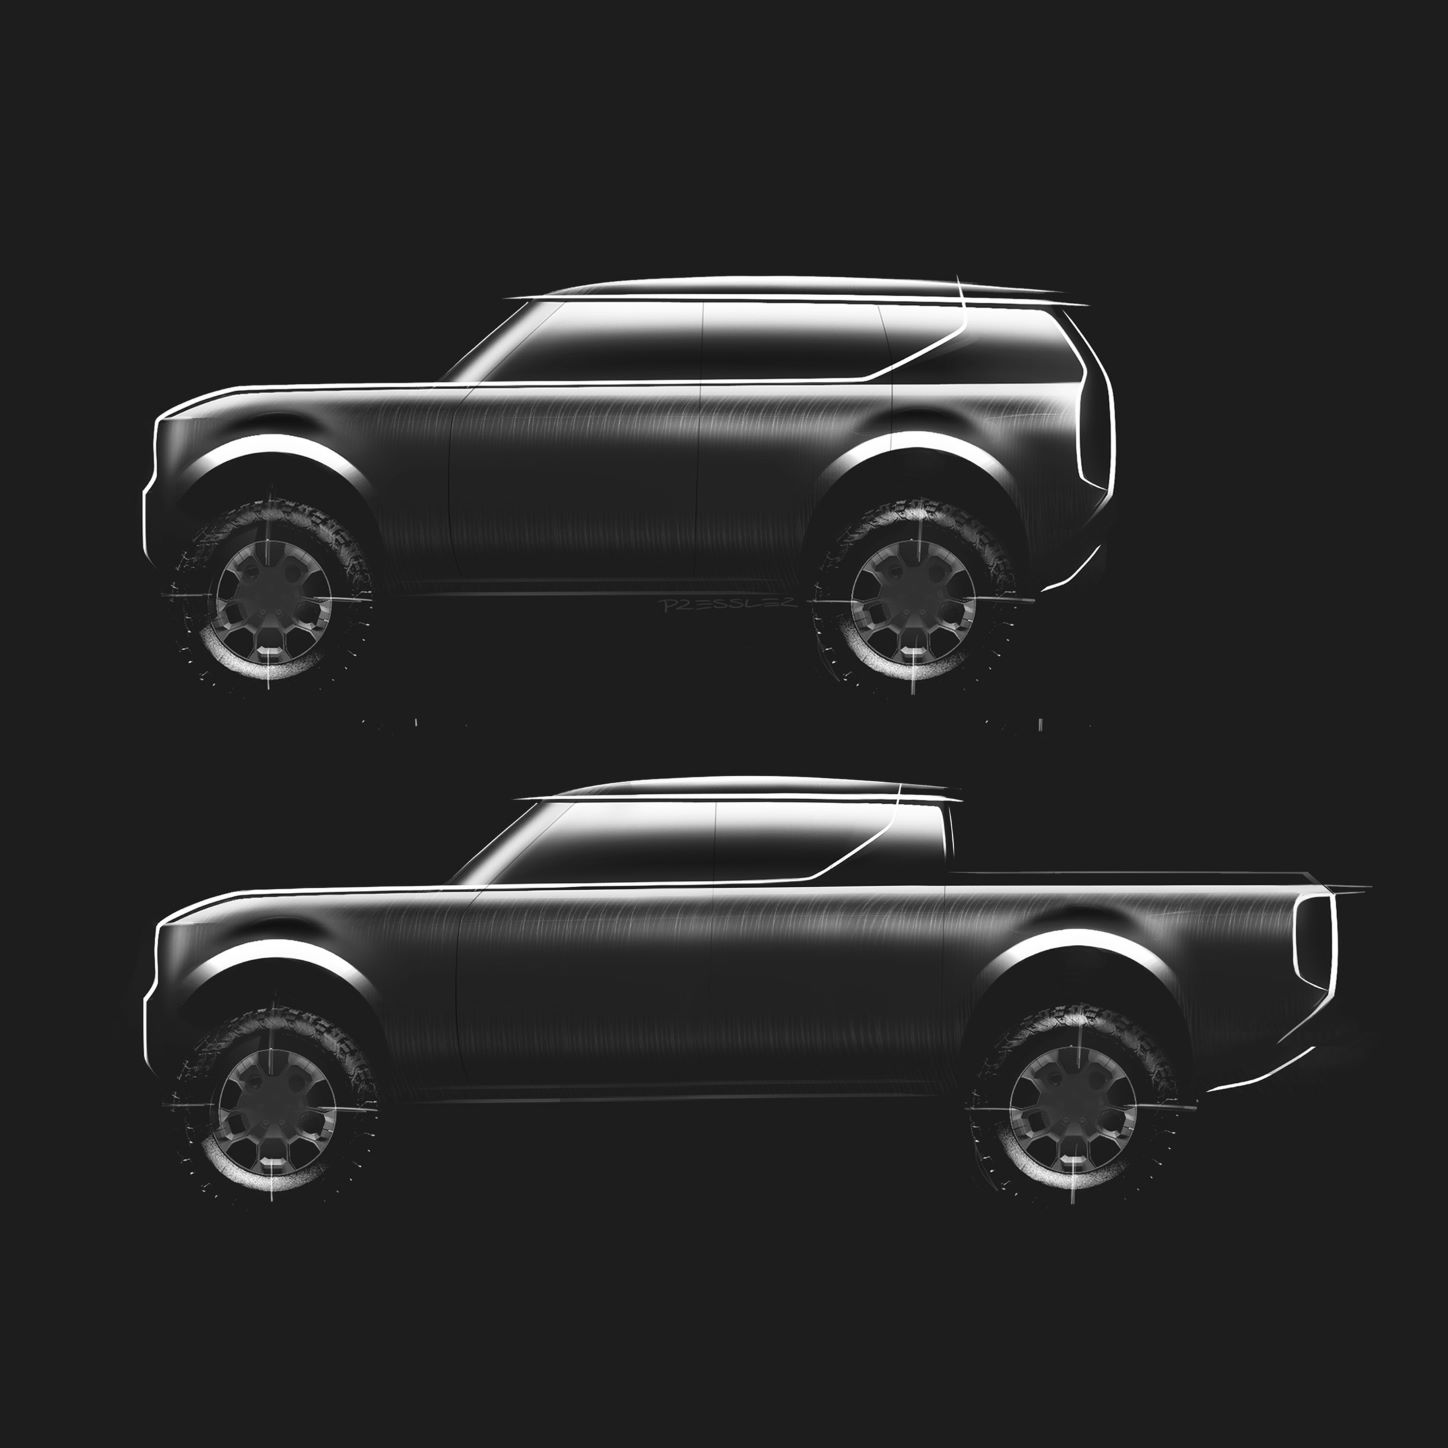 Concept drawing of the new Volkswagen Scout pickup and SUV